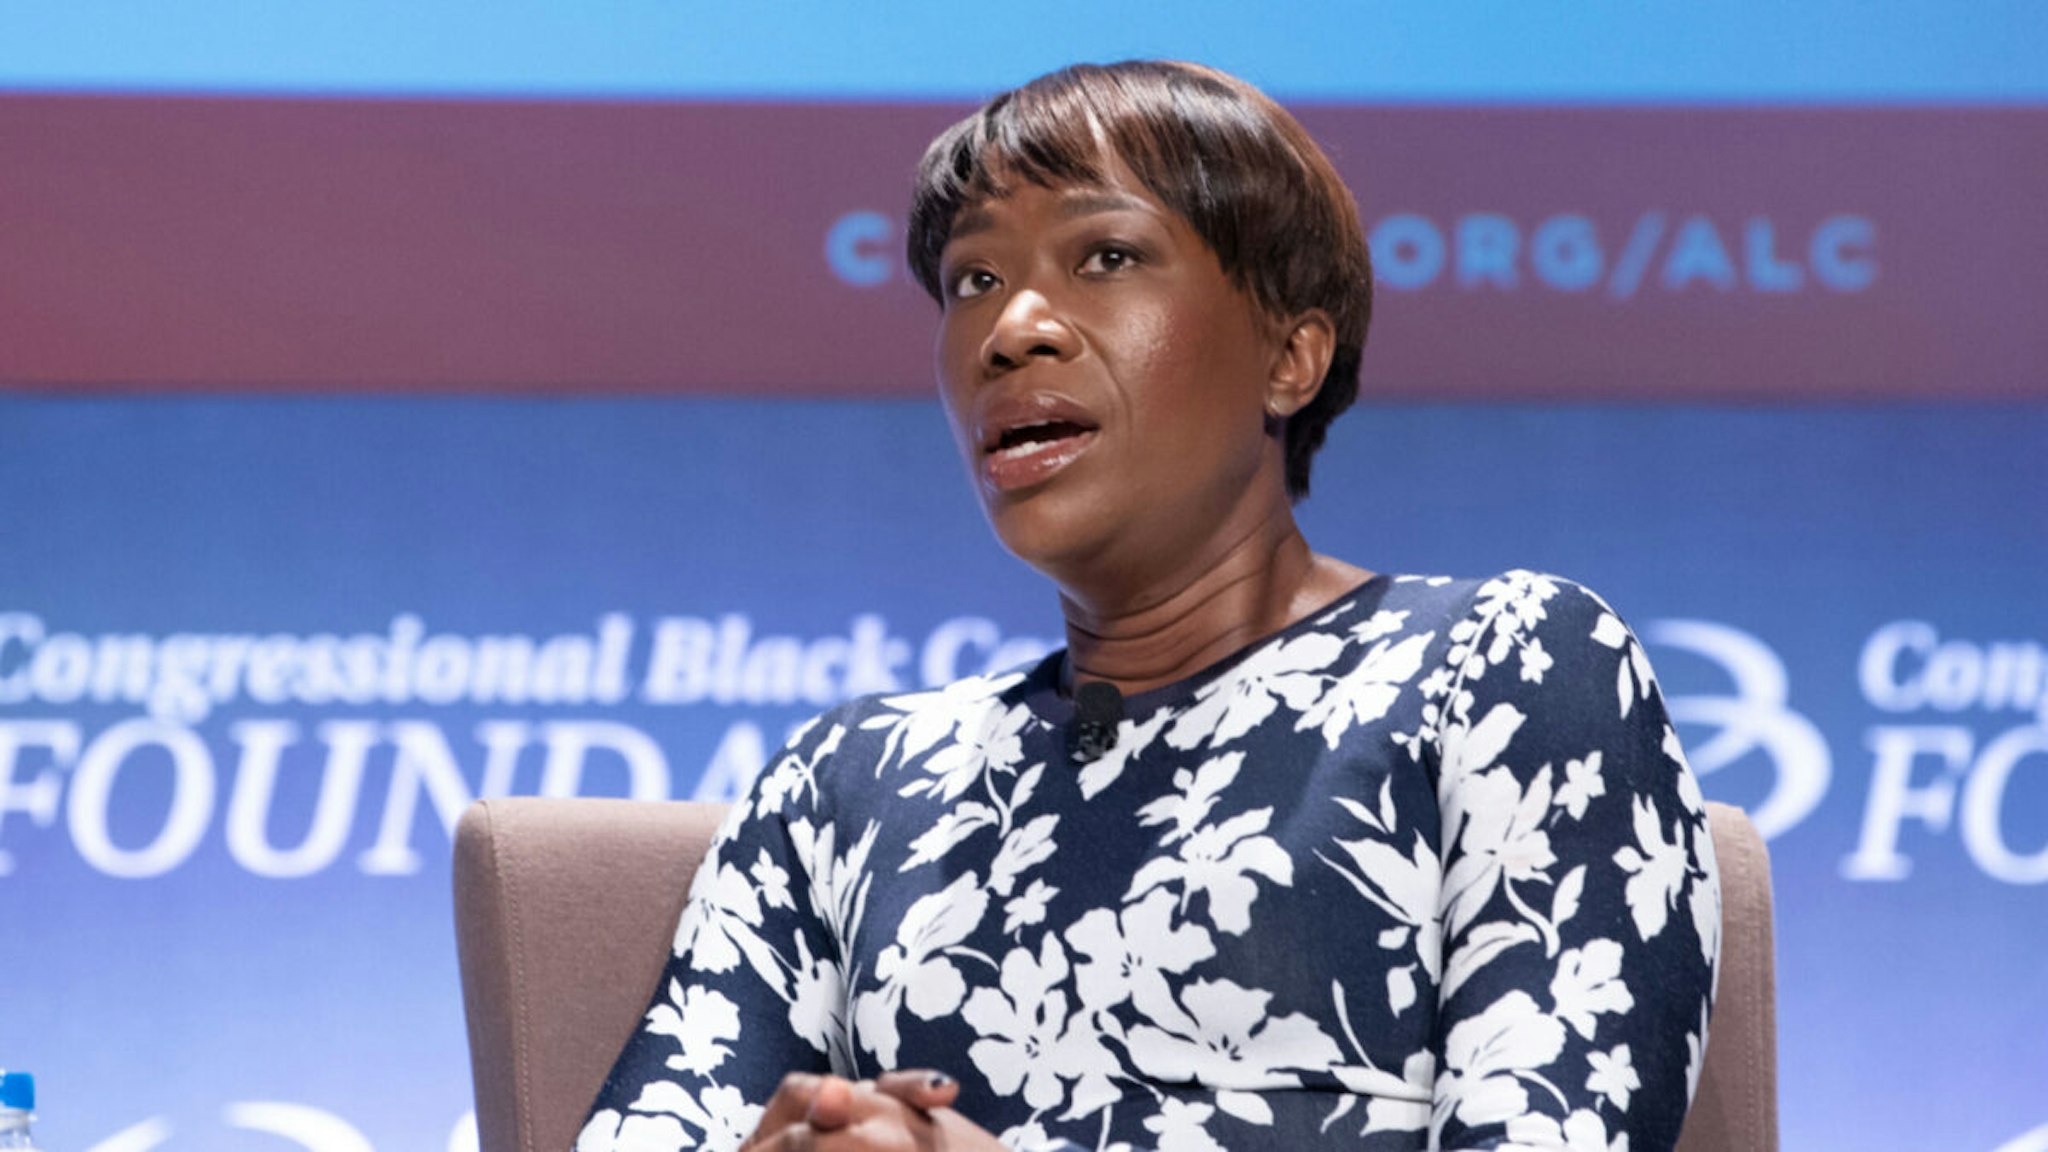 Joy Reid attends the National Town Hall on the second day of the 48th Annual Congressional Black Caucus Foundation on September 13, 2018 in Washington, DC.